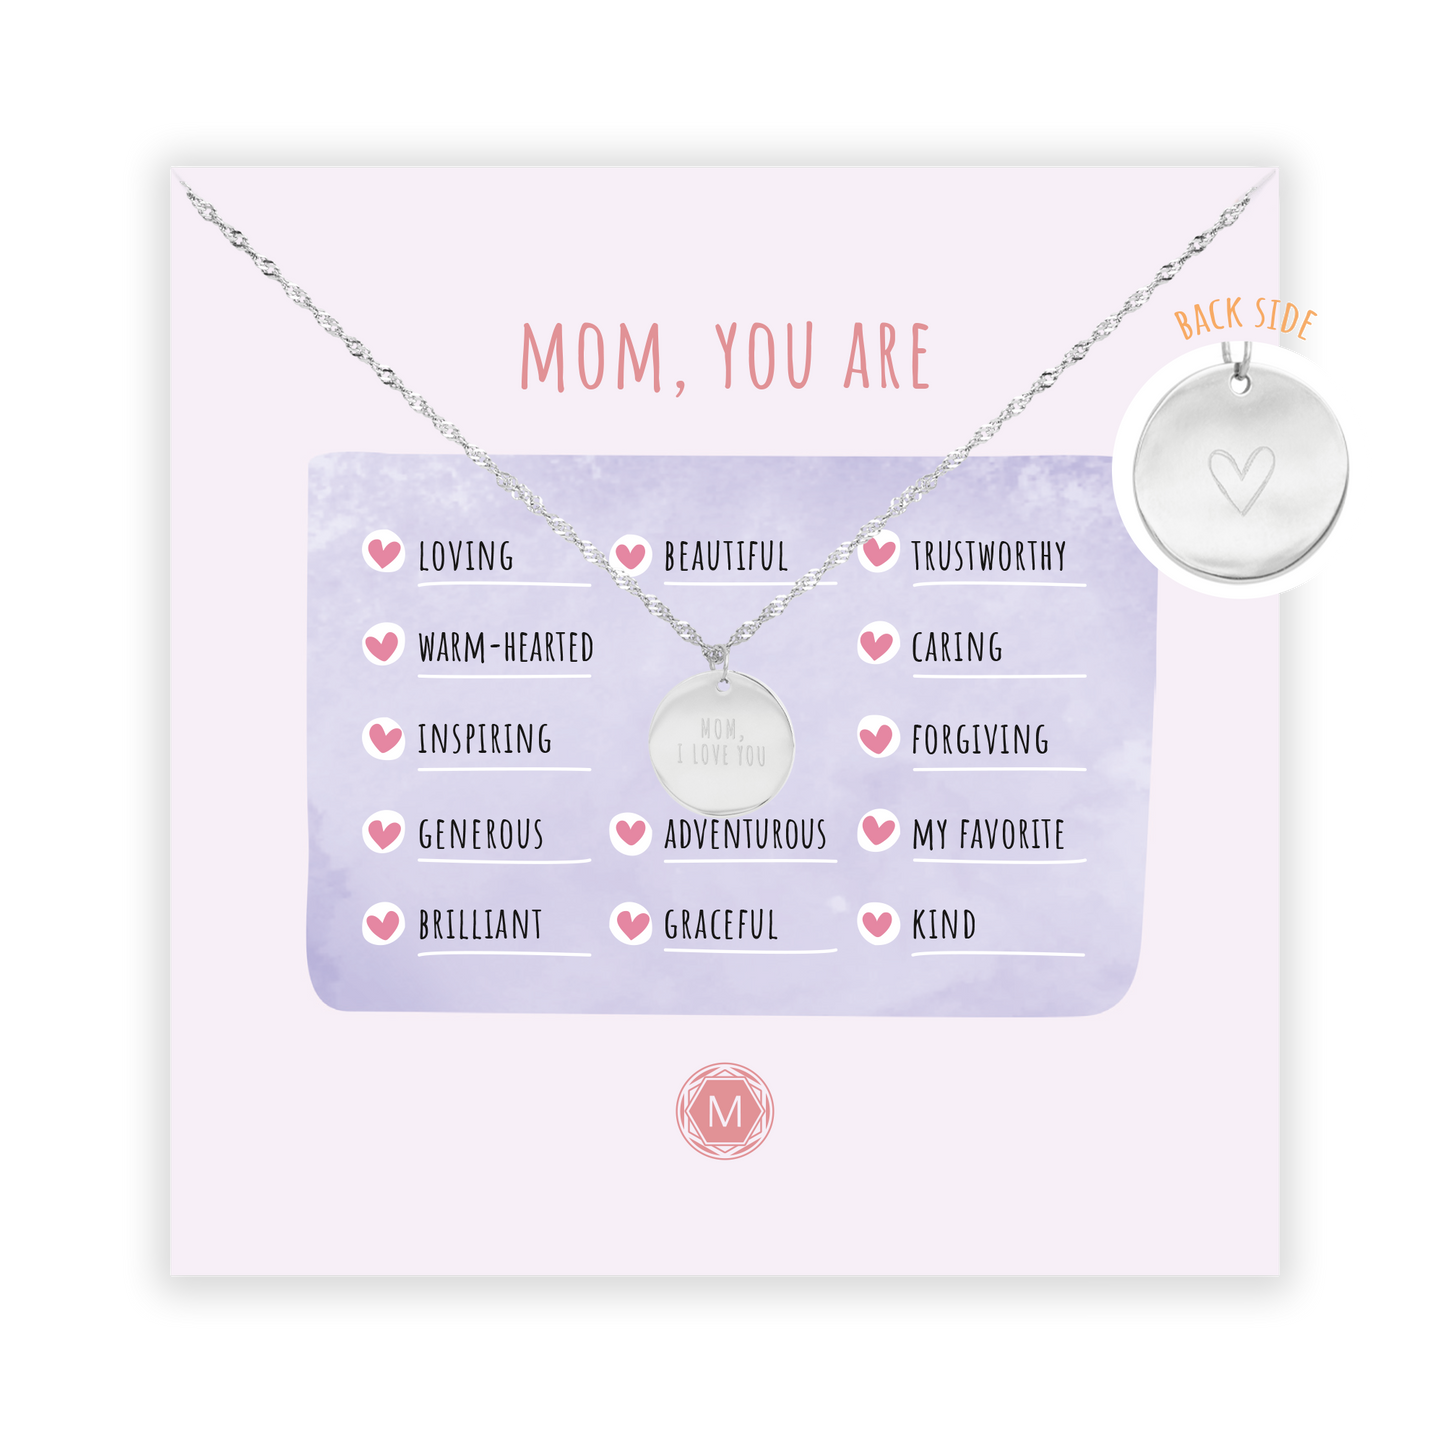 MOM, YOU ARE Necklace